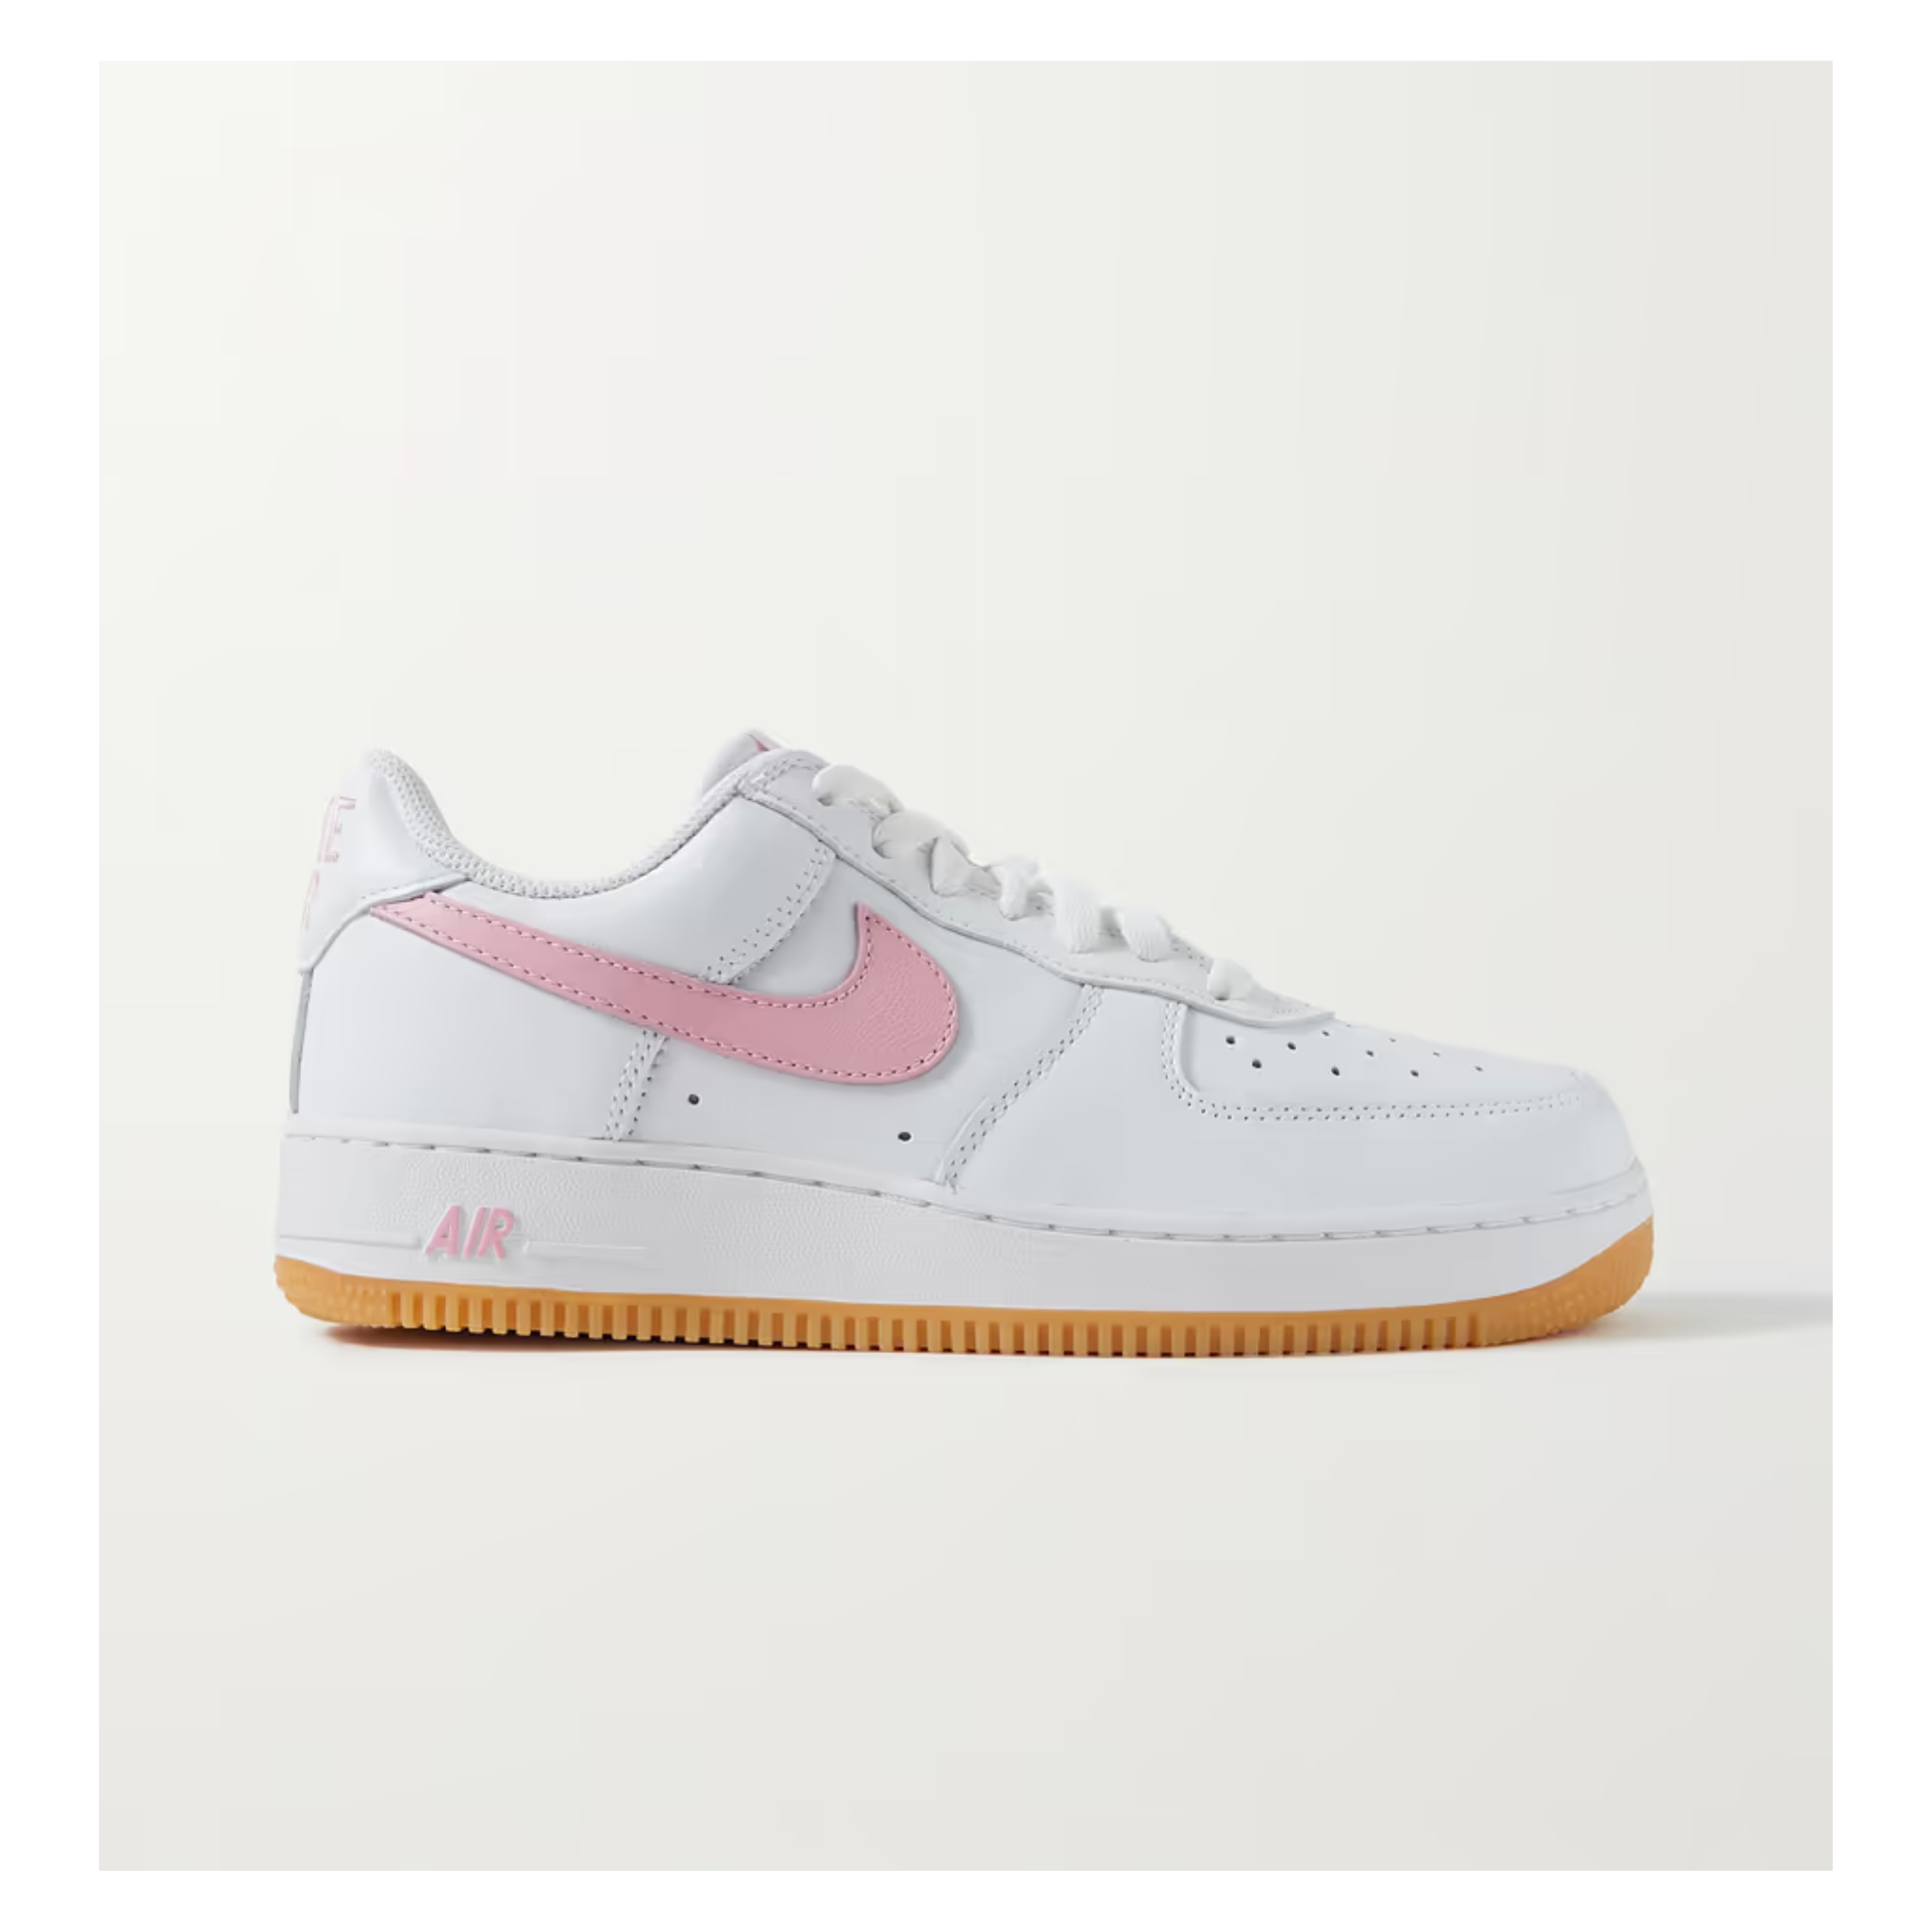 Nike Women's Air Force 1 Low Retro leather sneakers